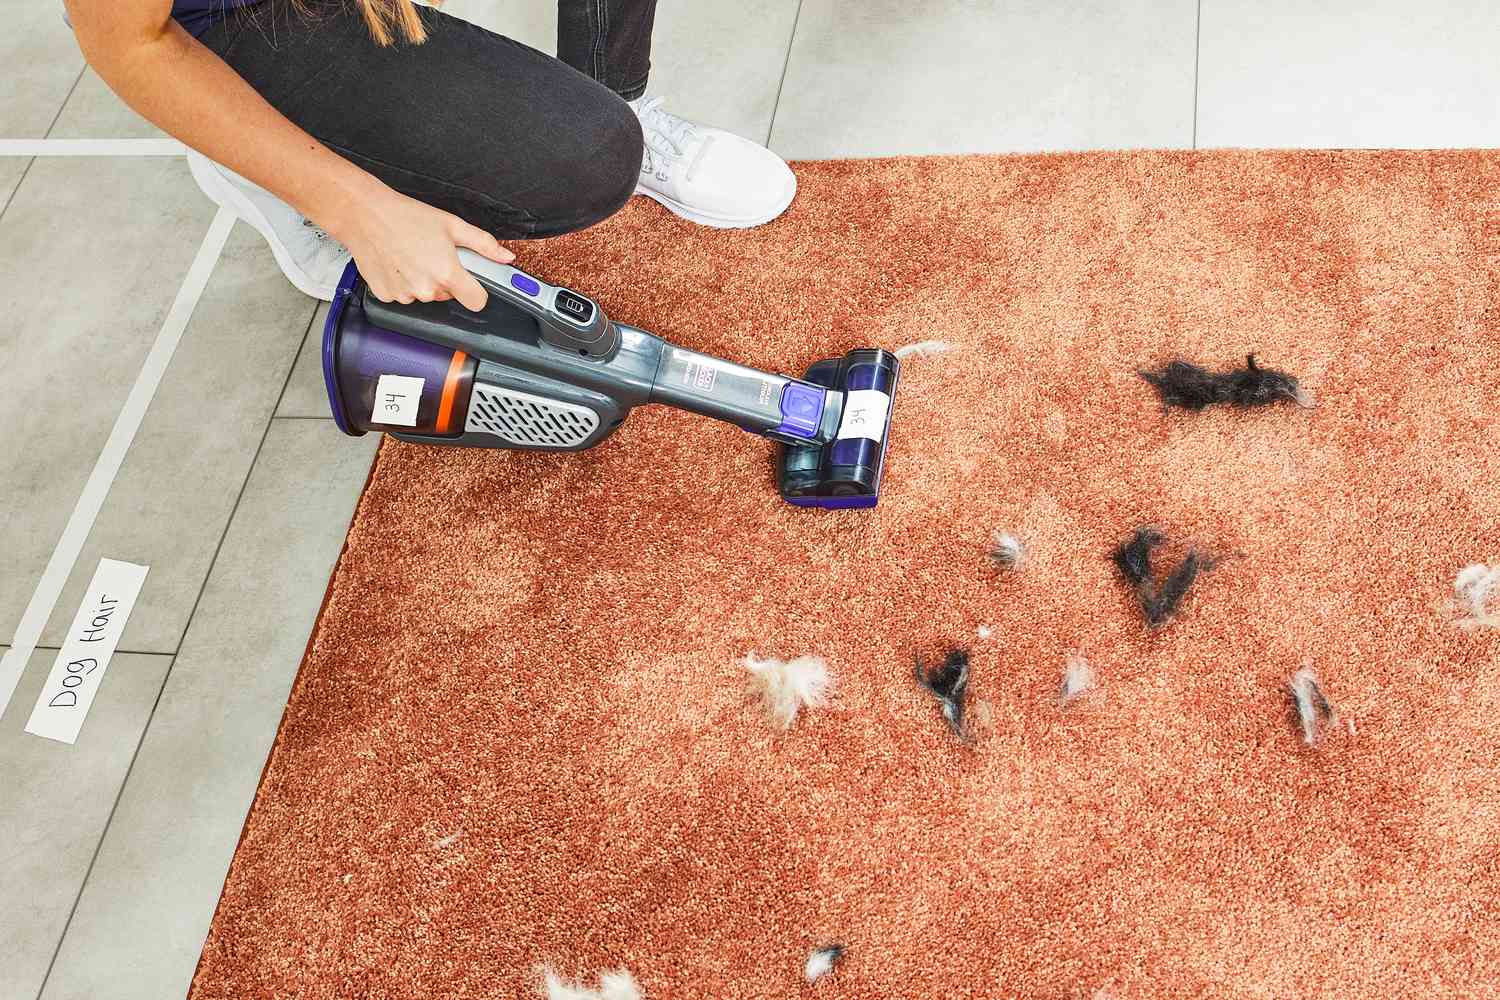 Person using the Black+Decker Dustbuster AdvancedClean+ Pet Cordless Hand Vacuum Cleaner to clean pet hair from an orange carpet